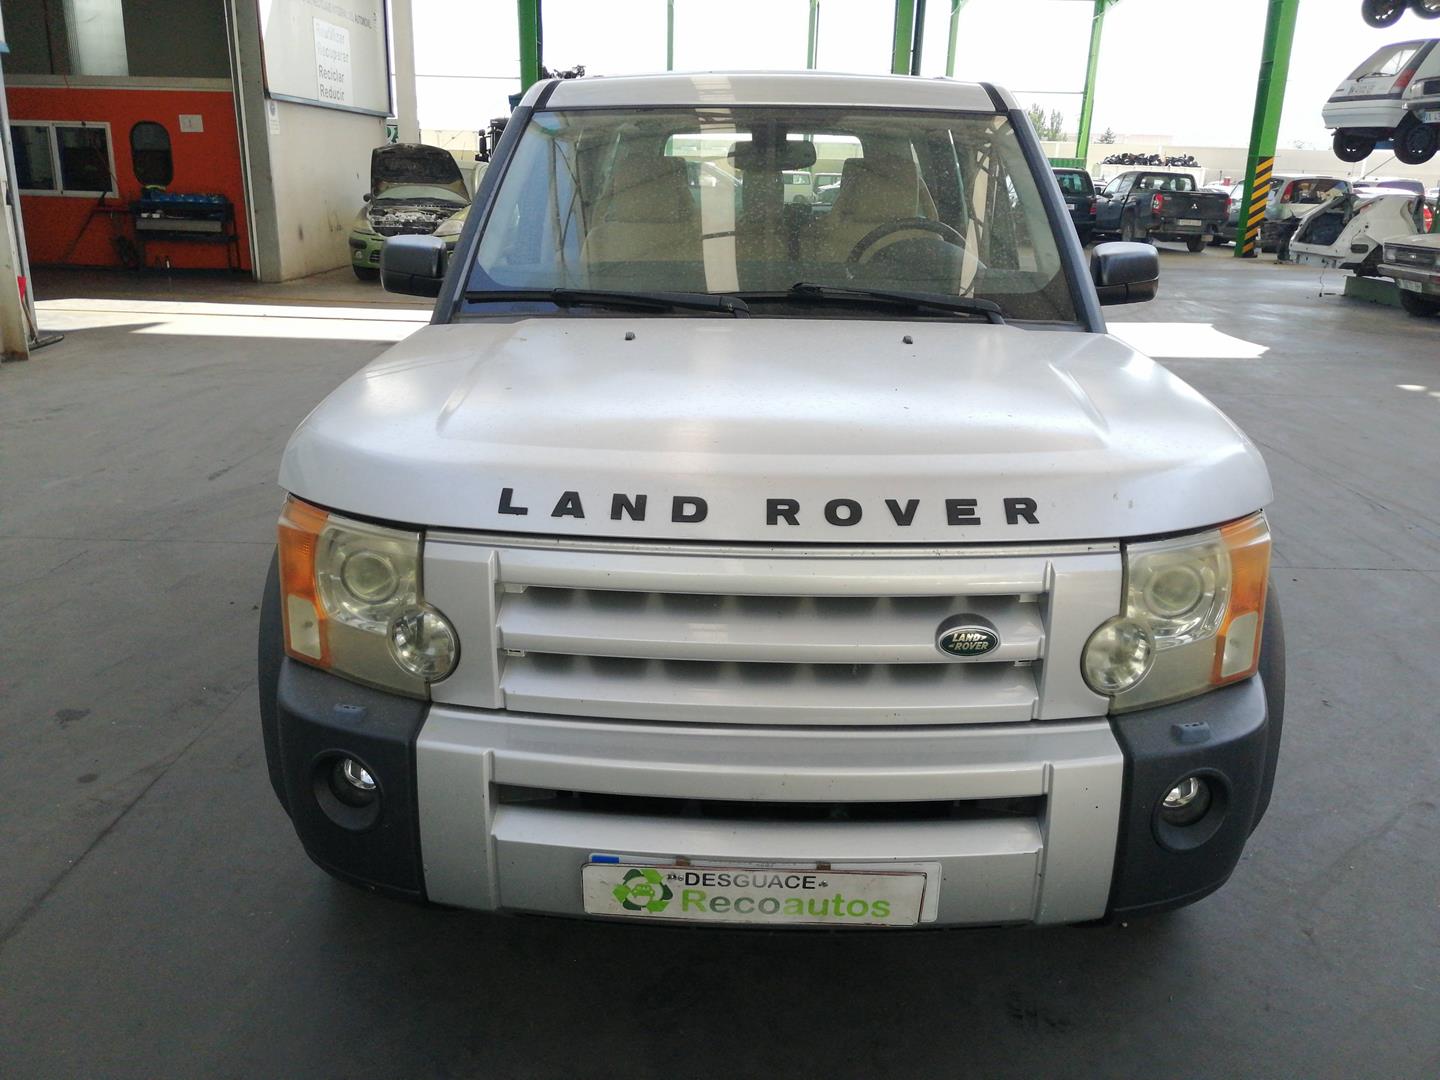 LAND ROVER Discovery 4 generation (2009-2016) Front Right Bonnet Hinge BKB780020, ELPARDER/IZQ, 5PUERTAS 21721461